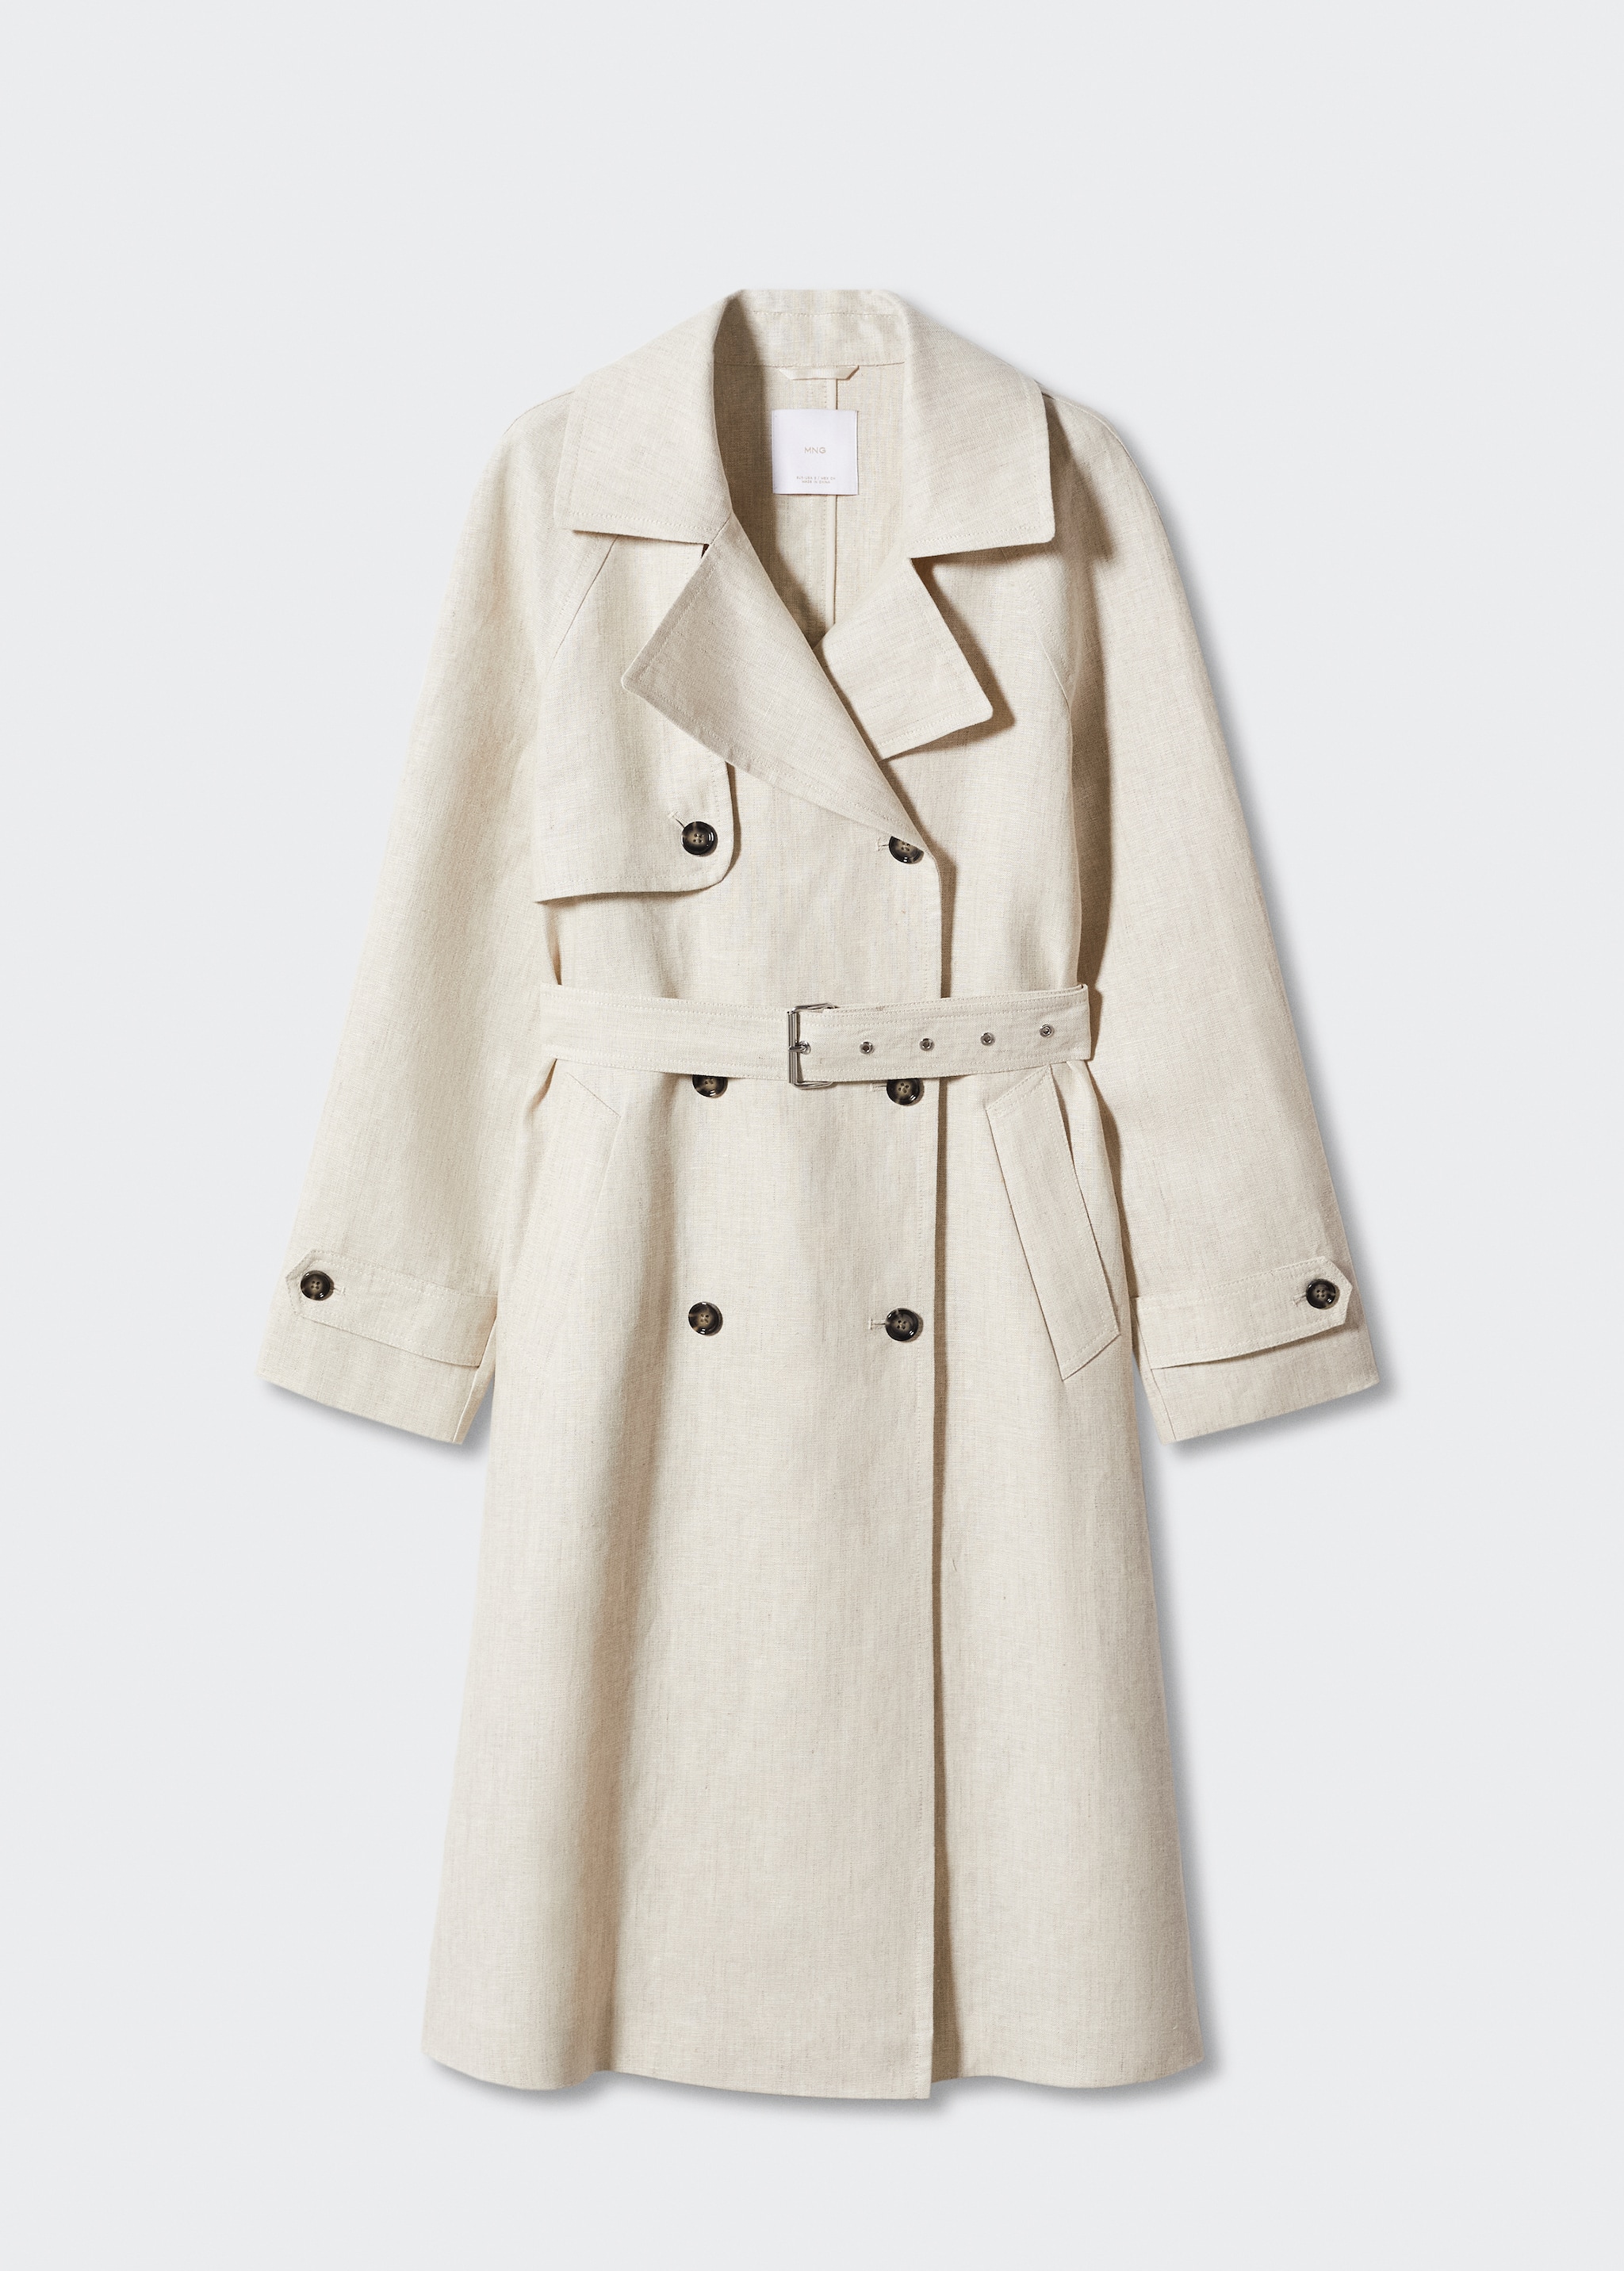 100% linen trench coat - Article without model